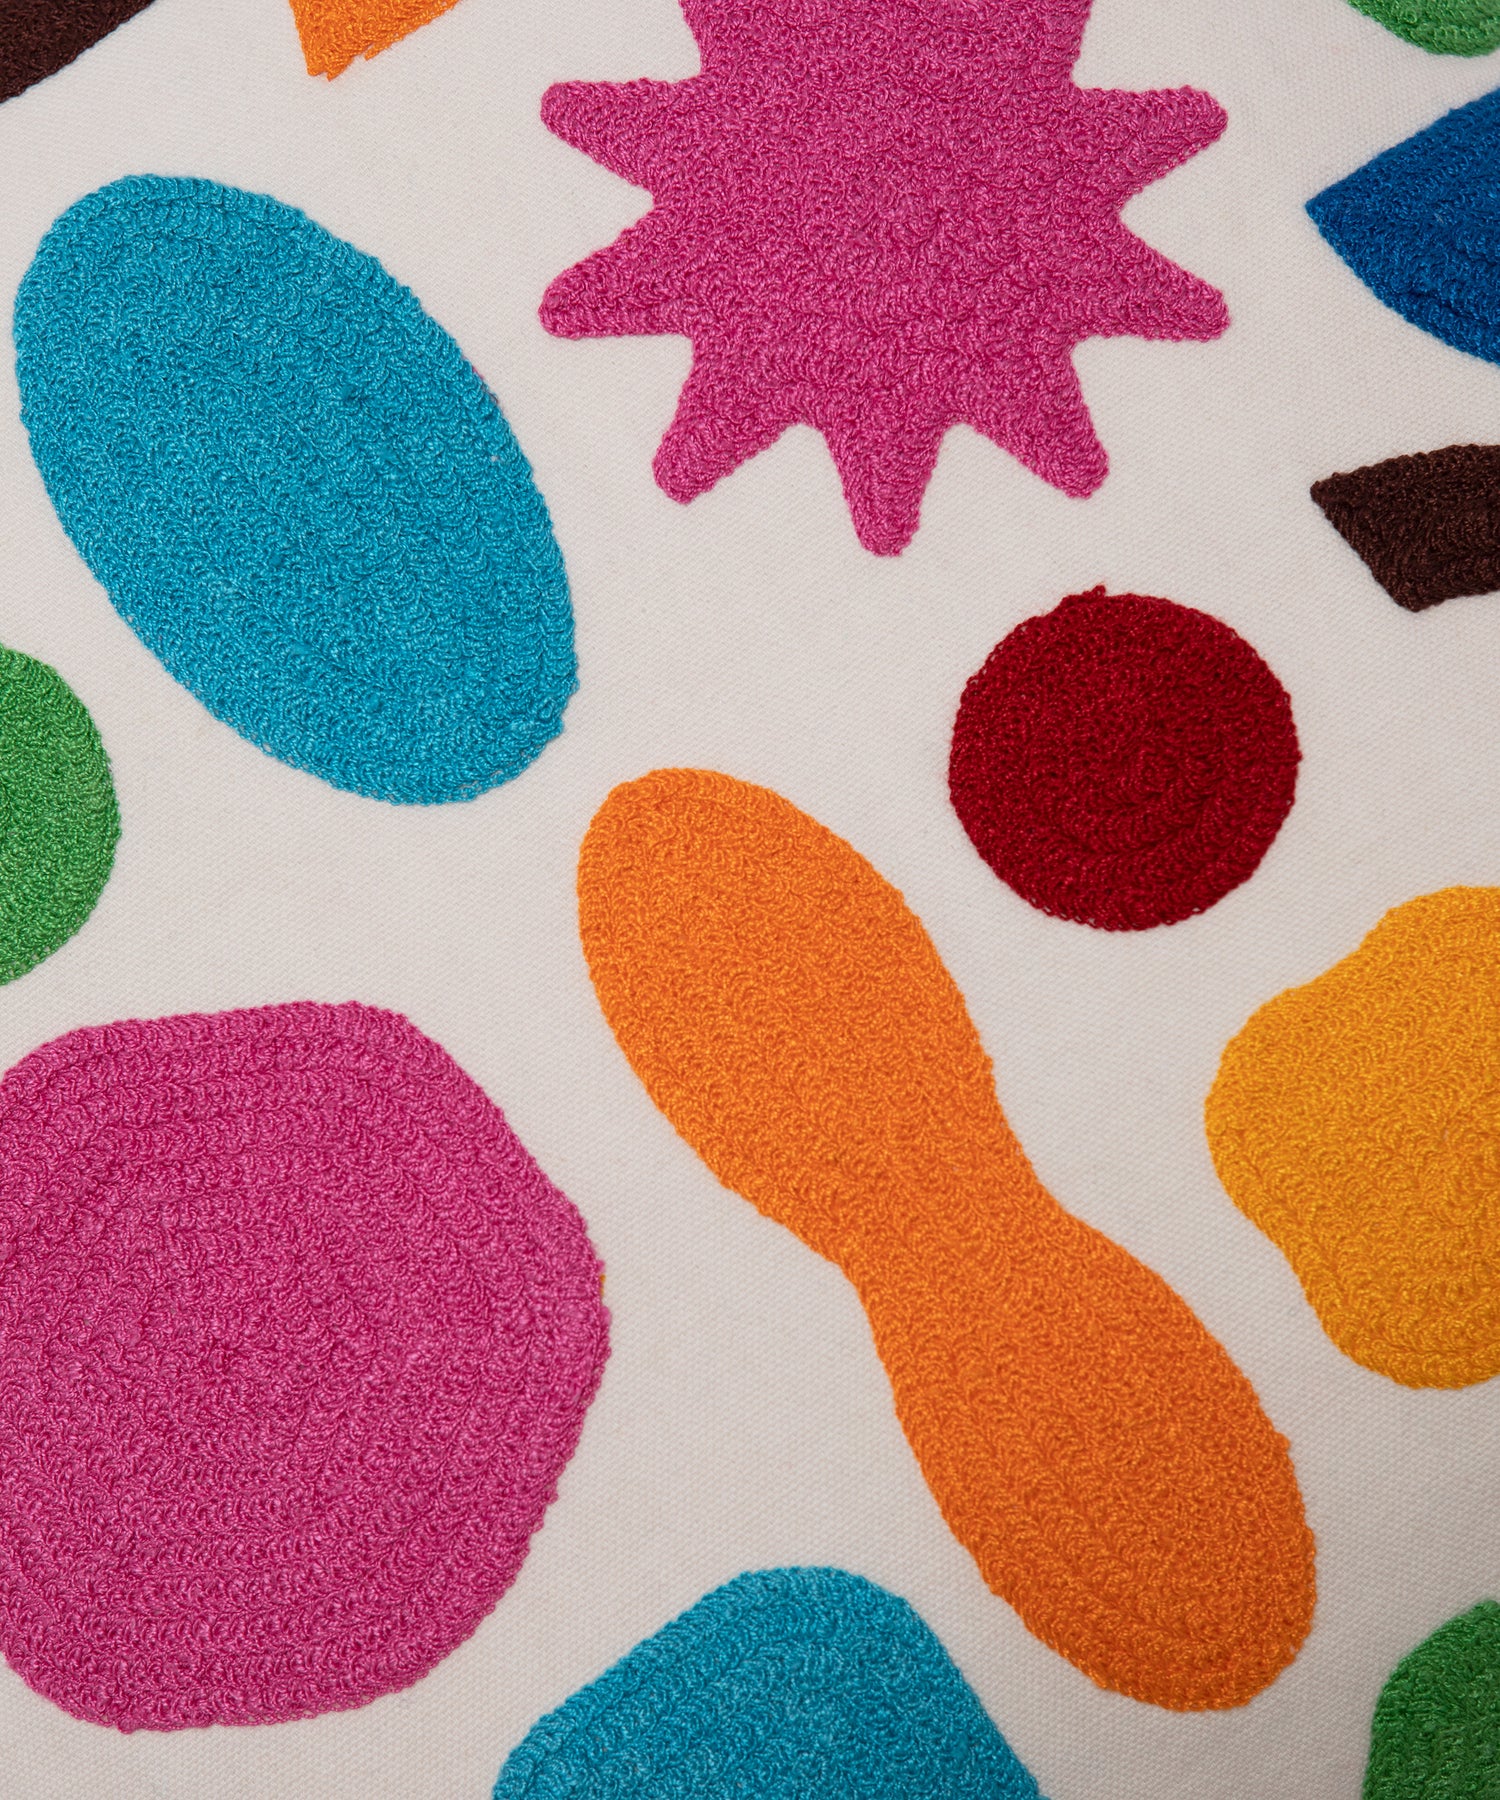 Close up of the different colored organic shapes on the Odds and Ends Pillow Cover.